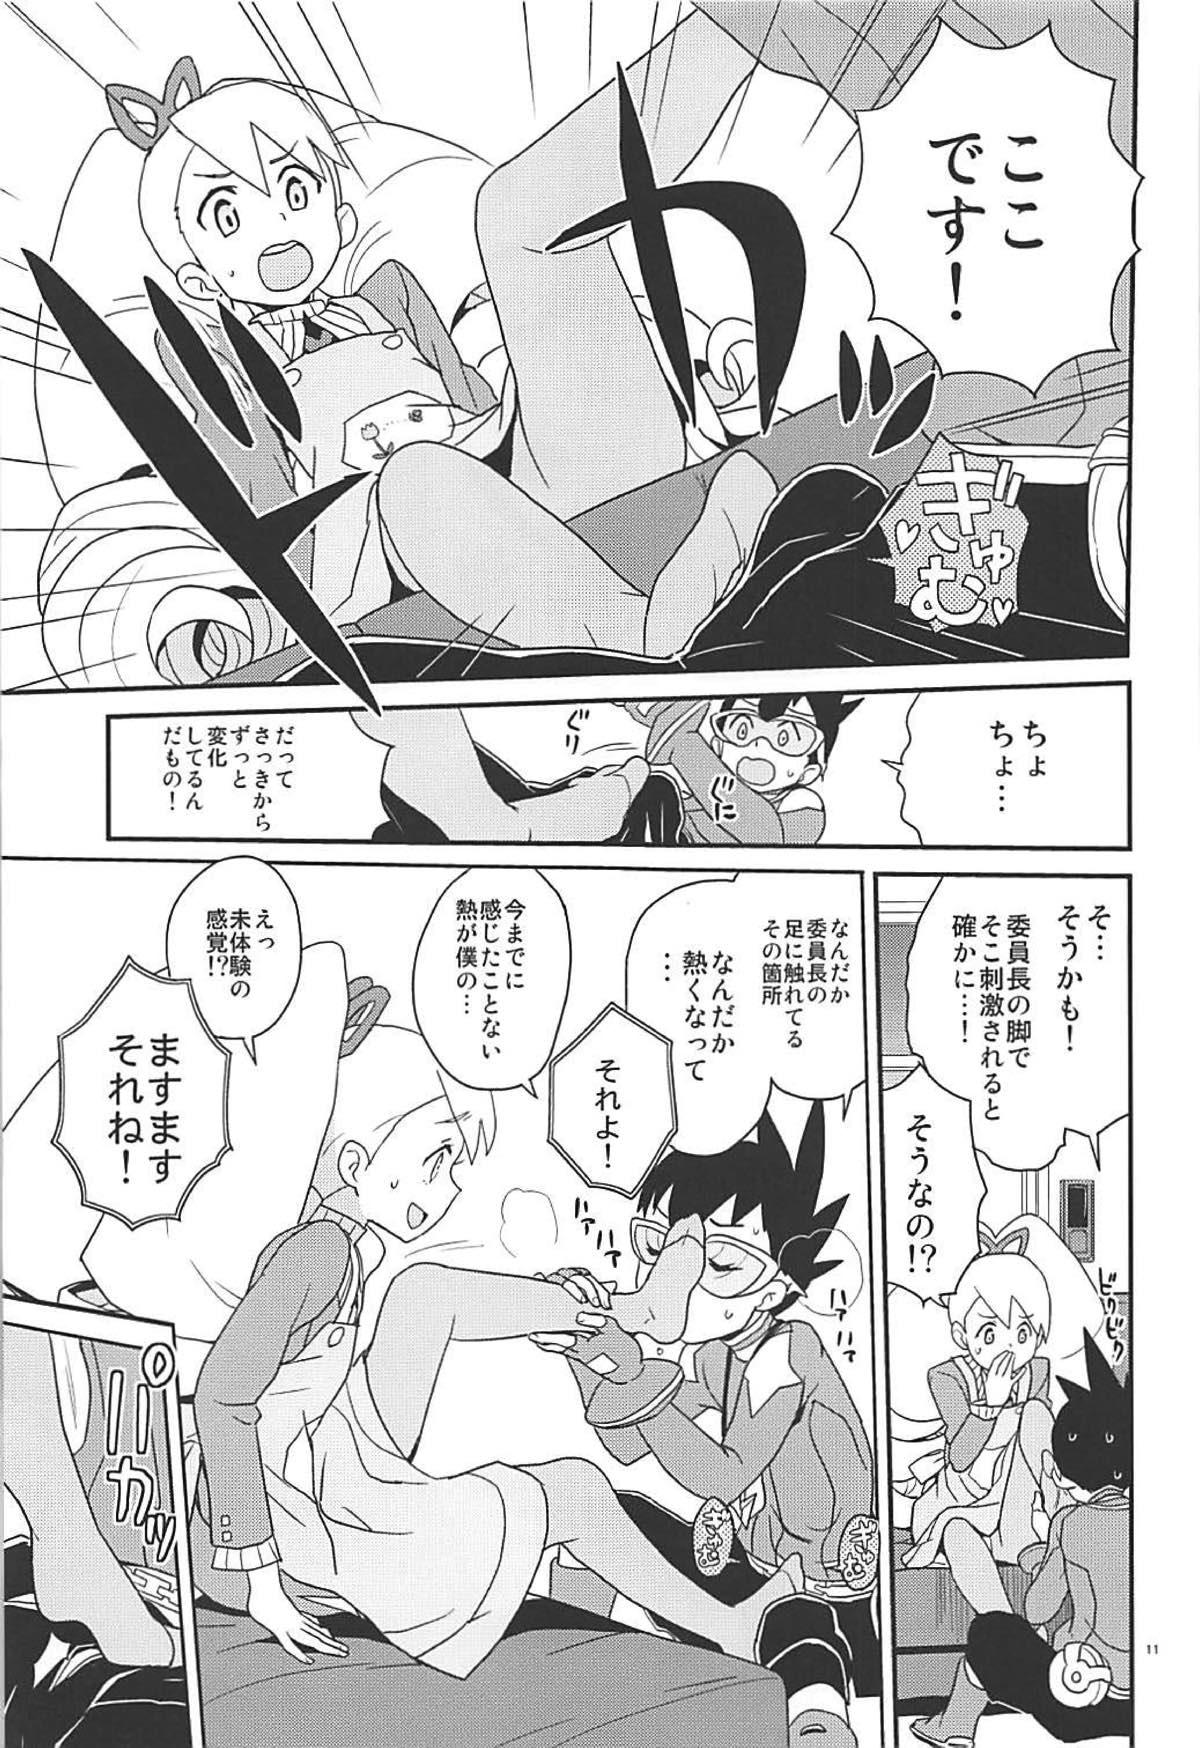 Lesbos Materialize Shirogane Luna - Mega man star force Three Some - Page 10